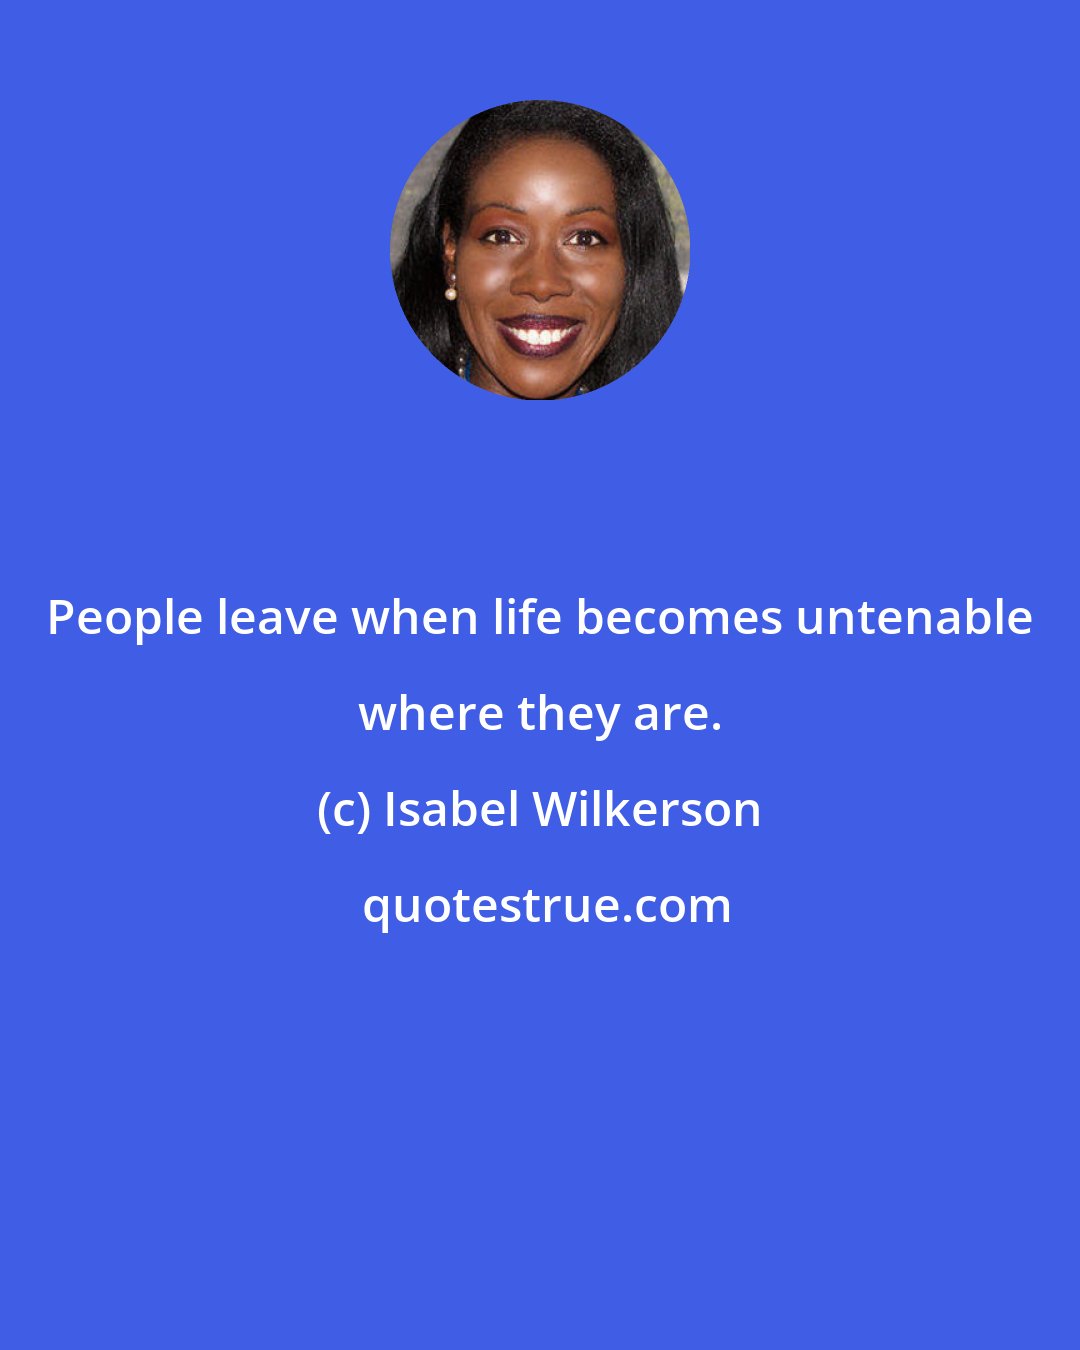 Isabel Wilkerson: People leave when life becomes untenable where they are.